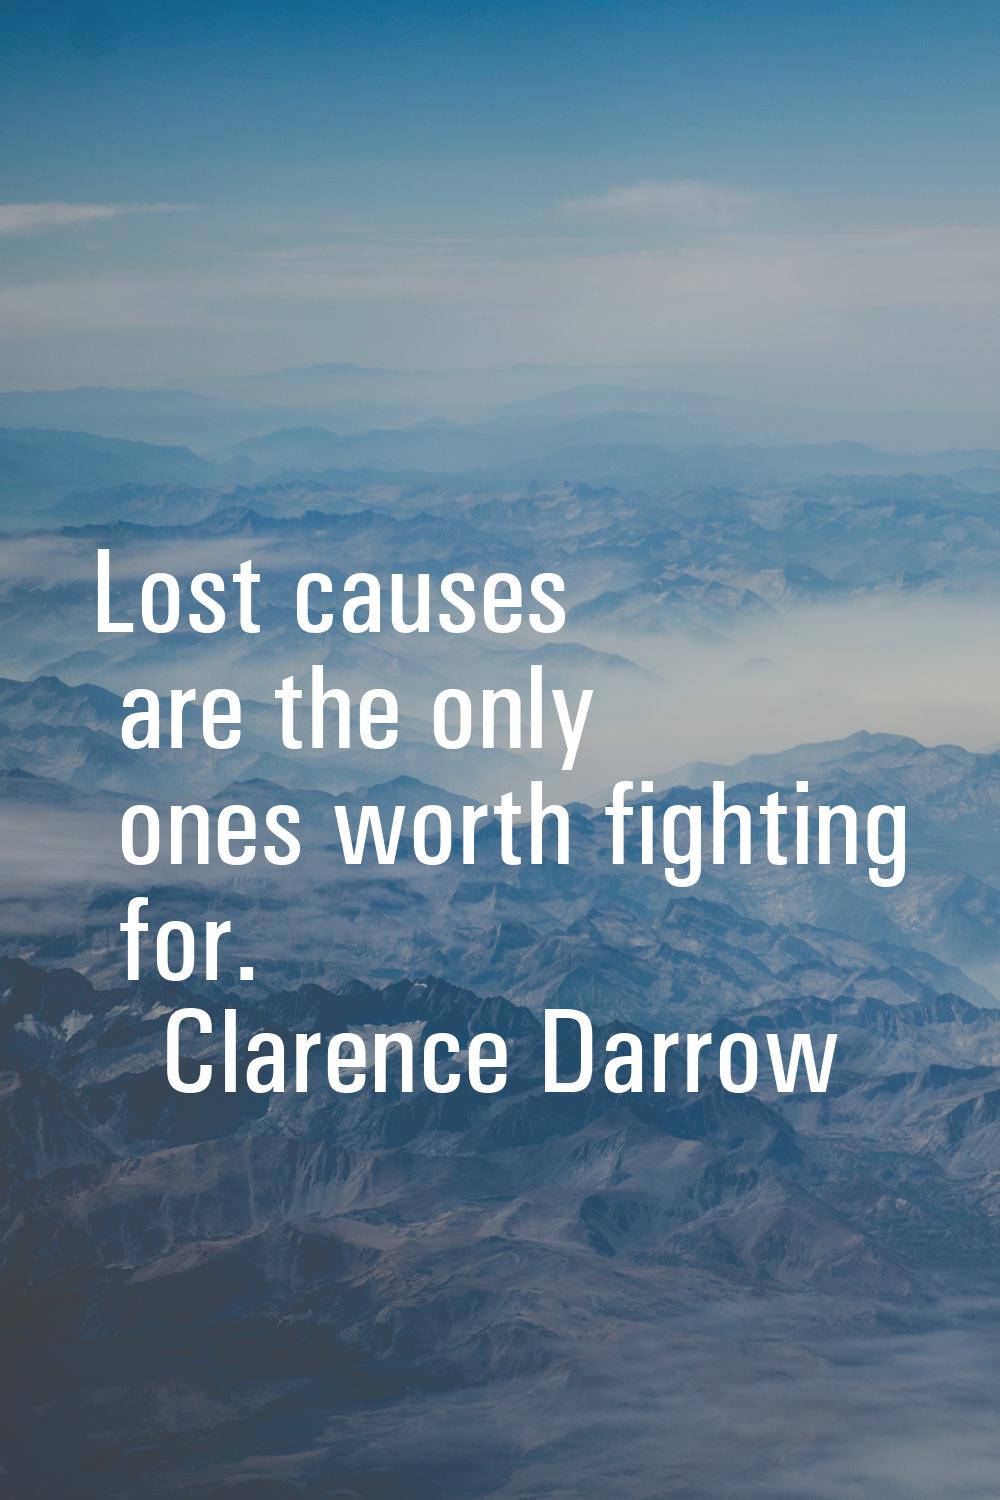 Lost causes are the only ones worth fighting for.